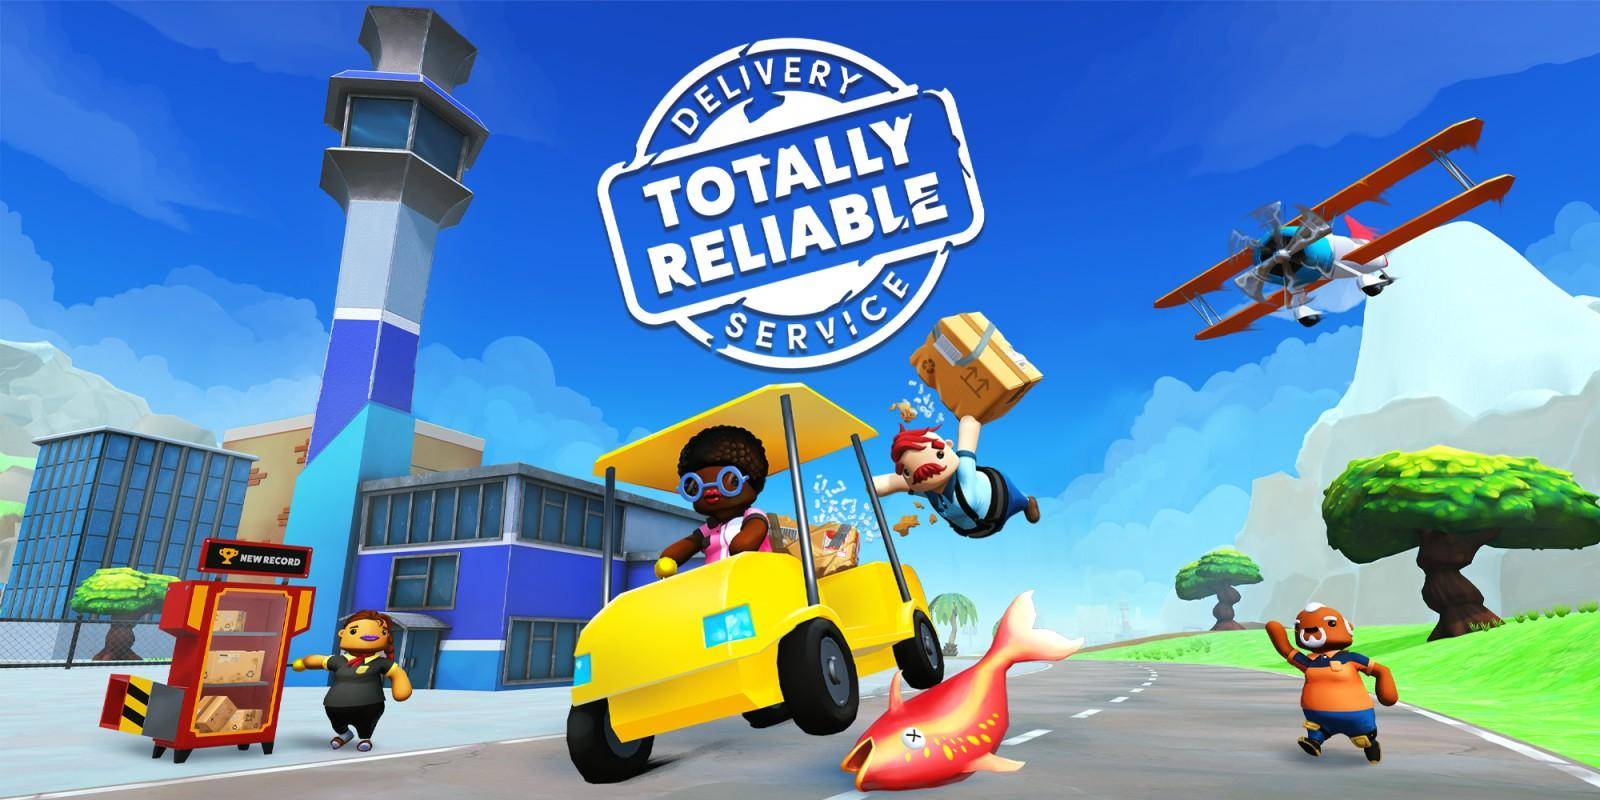 Totally Reliable Delivery Service is free for a whole week